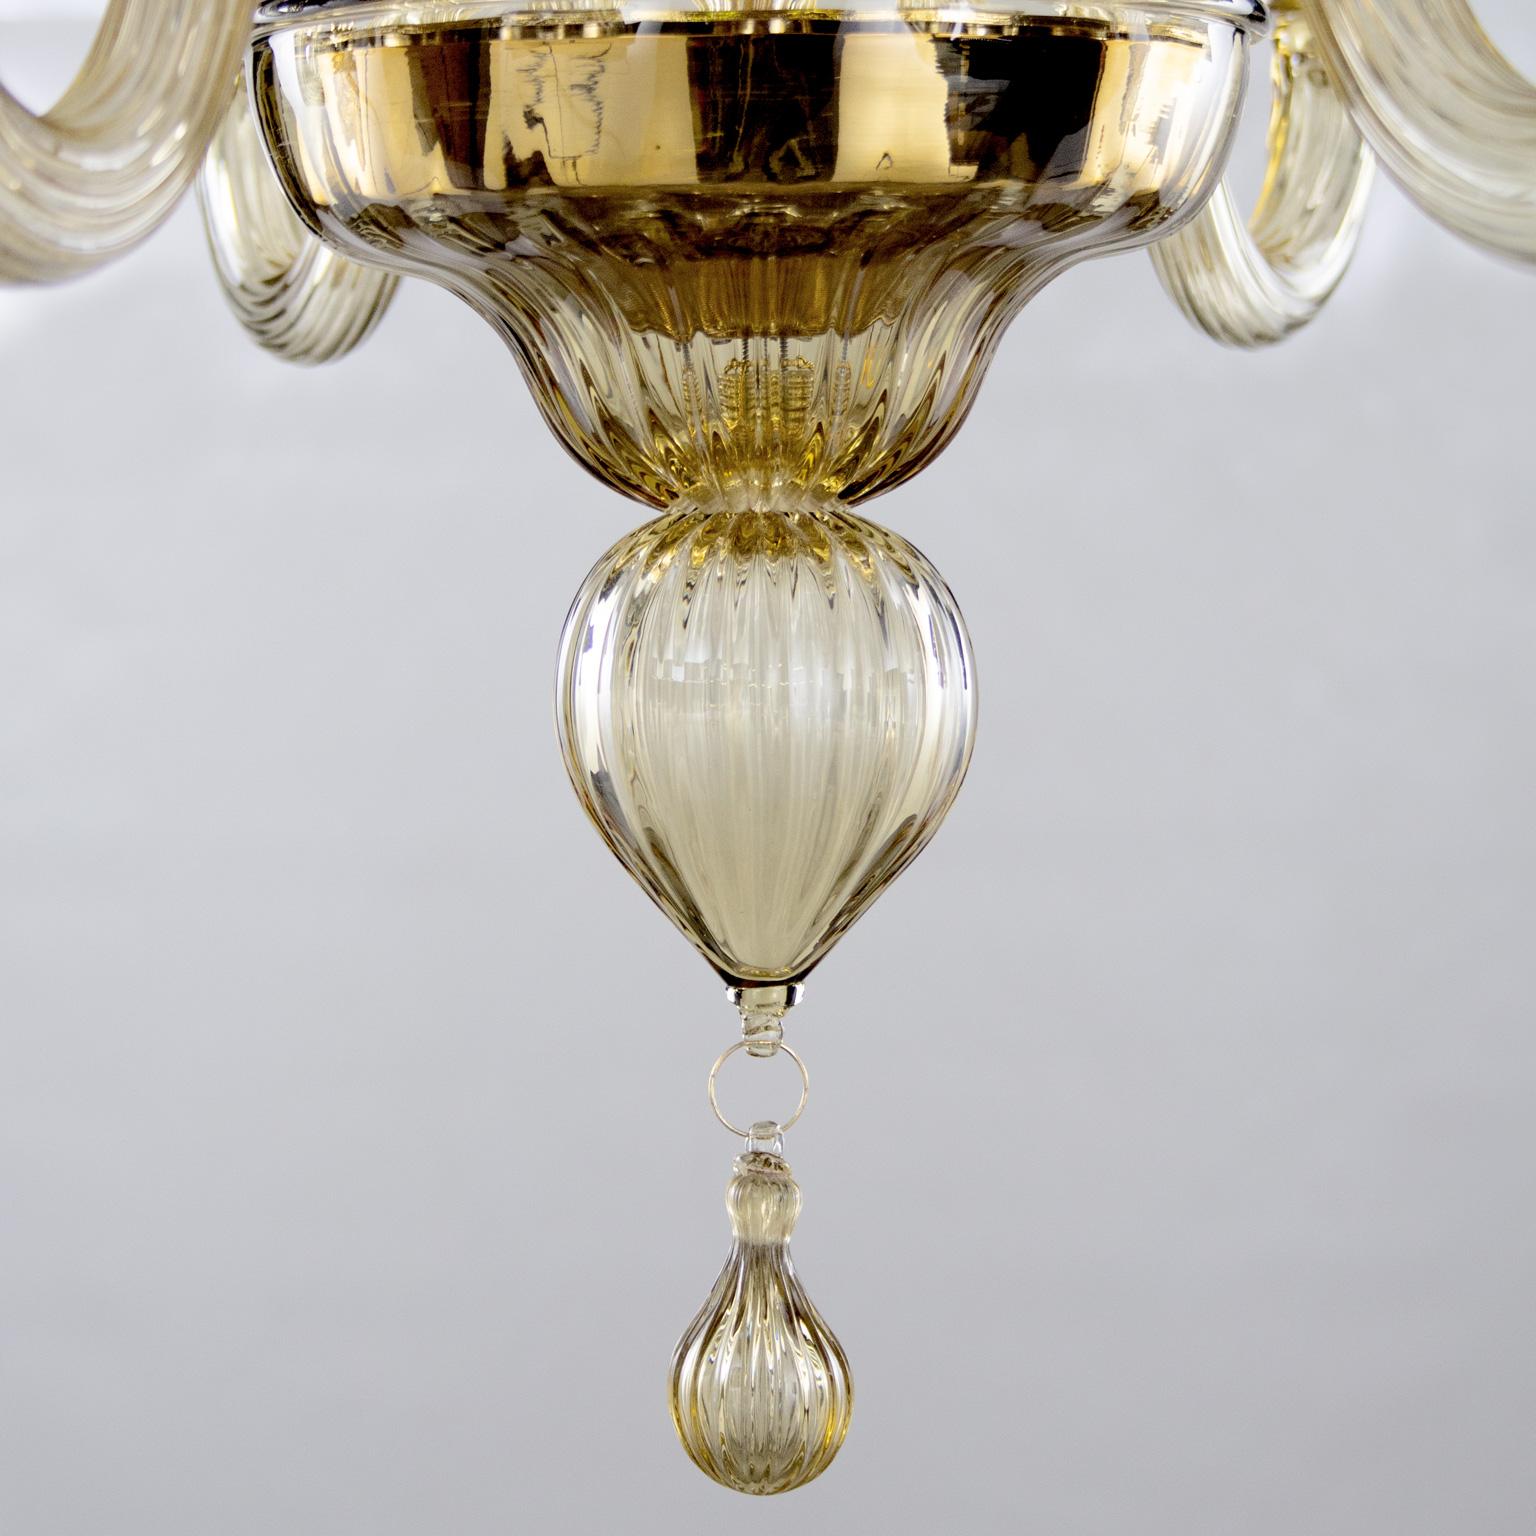 Italian Chandelier 6 Arms Smoky Quartz Murano Glass, Lampshades Chapeau by Multiforme For Sale